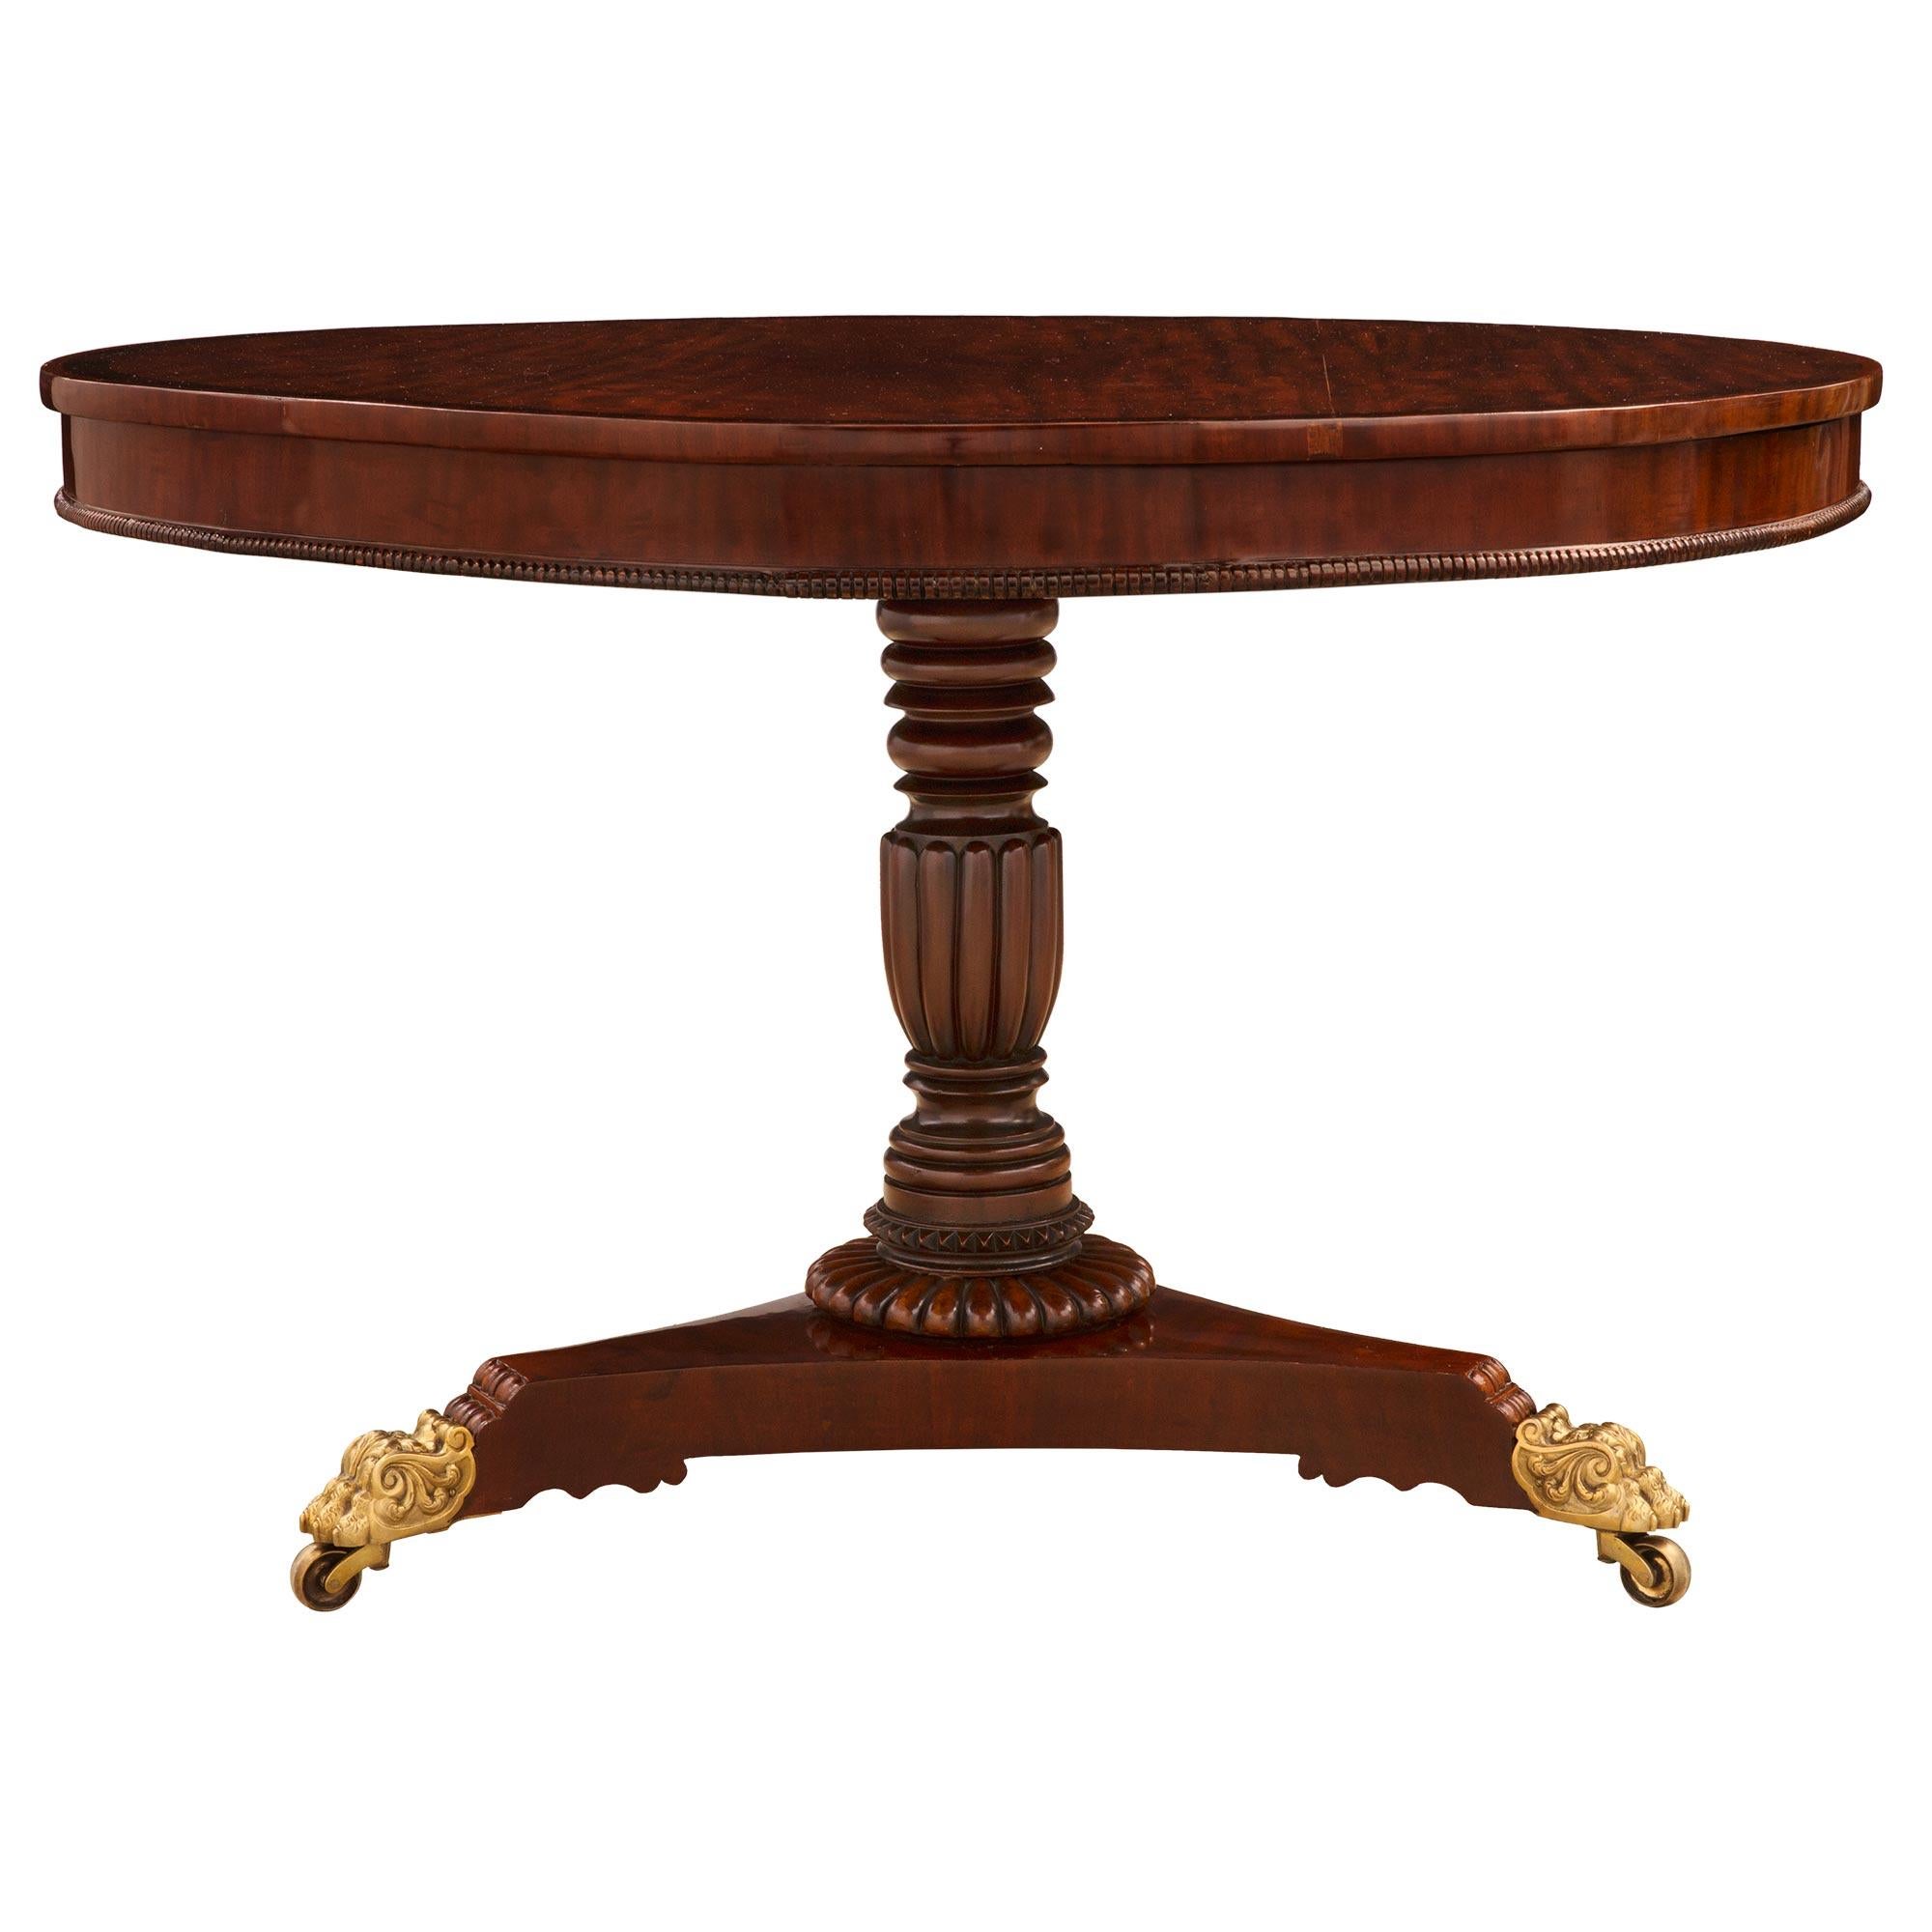 English 19th Century Regency Style Mahogany, Kingwood and Ormolu Center Table In Good Condition For Sale In West Palm Beach, FL